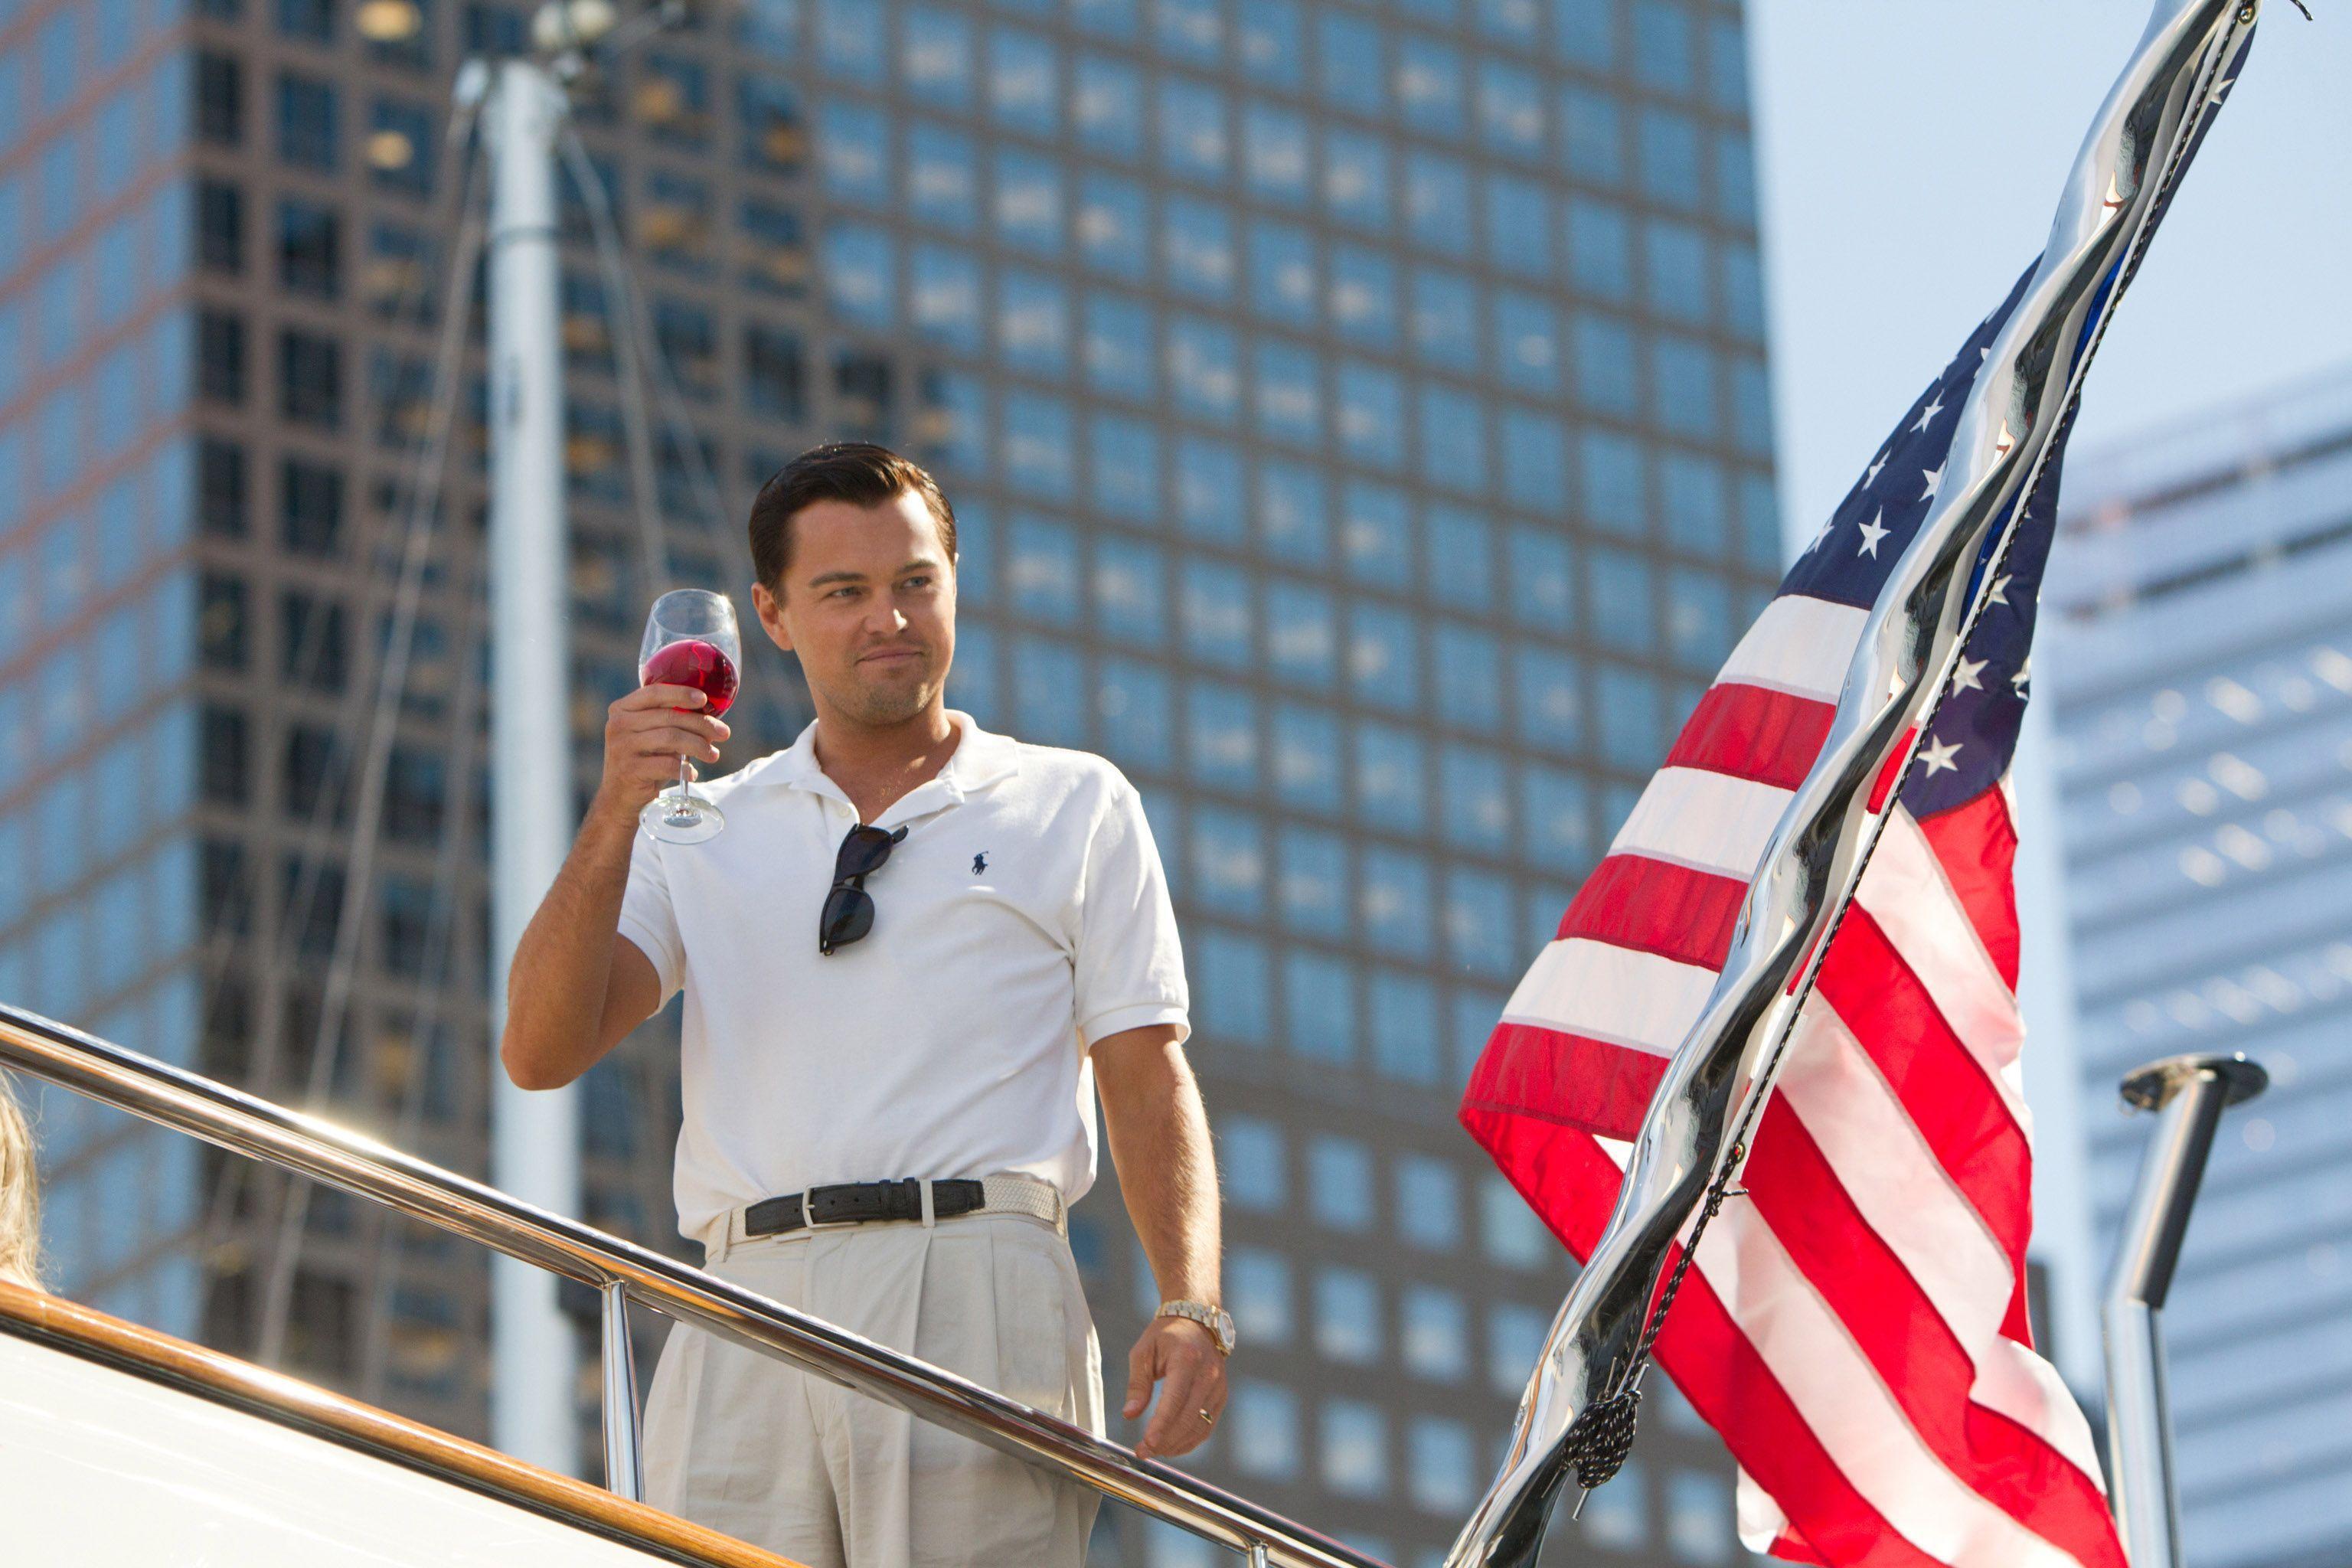 DiCaprio in The Wolf Of Wall Street Wallpaper Wide or HD. Male